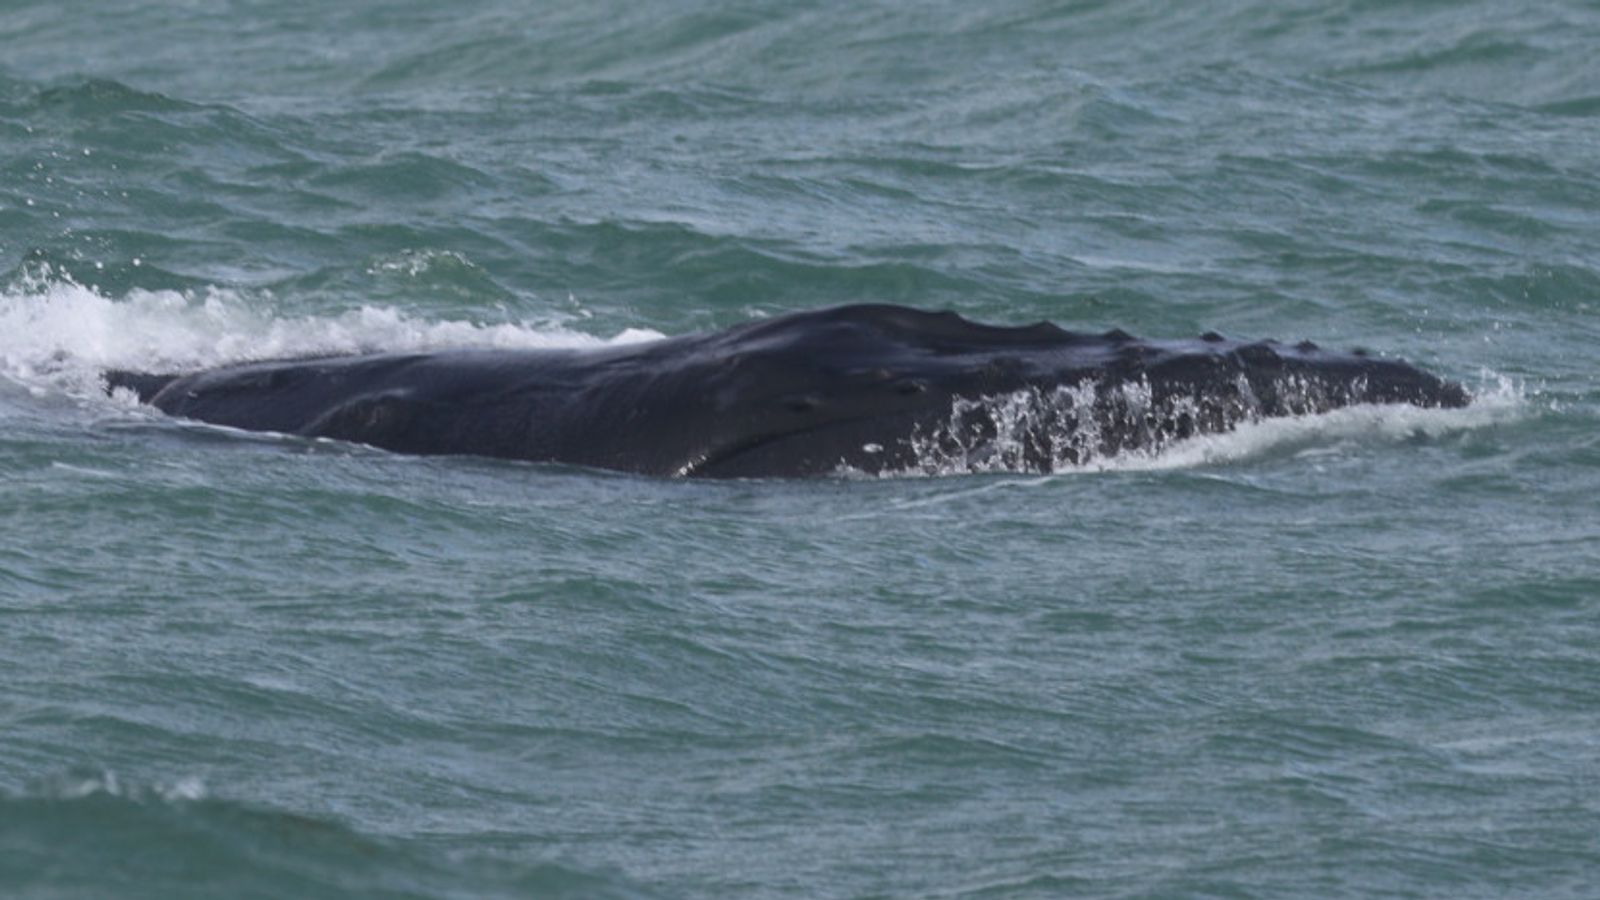 Rarely seen whale rescued after becoming stuck off coast of Cornwall